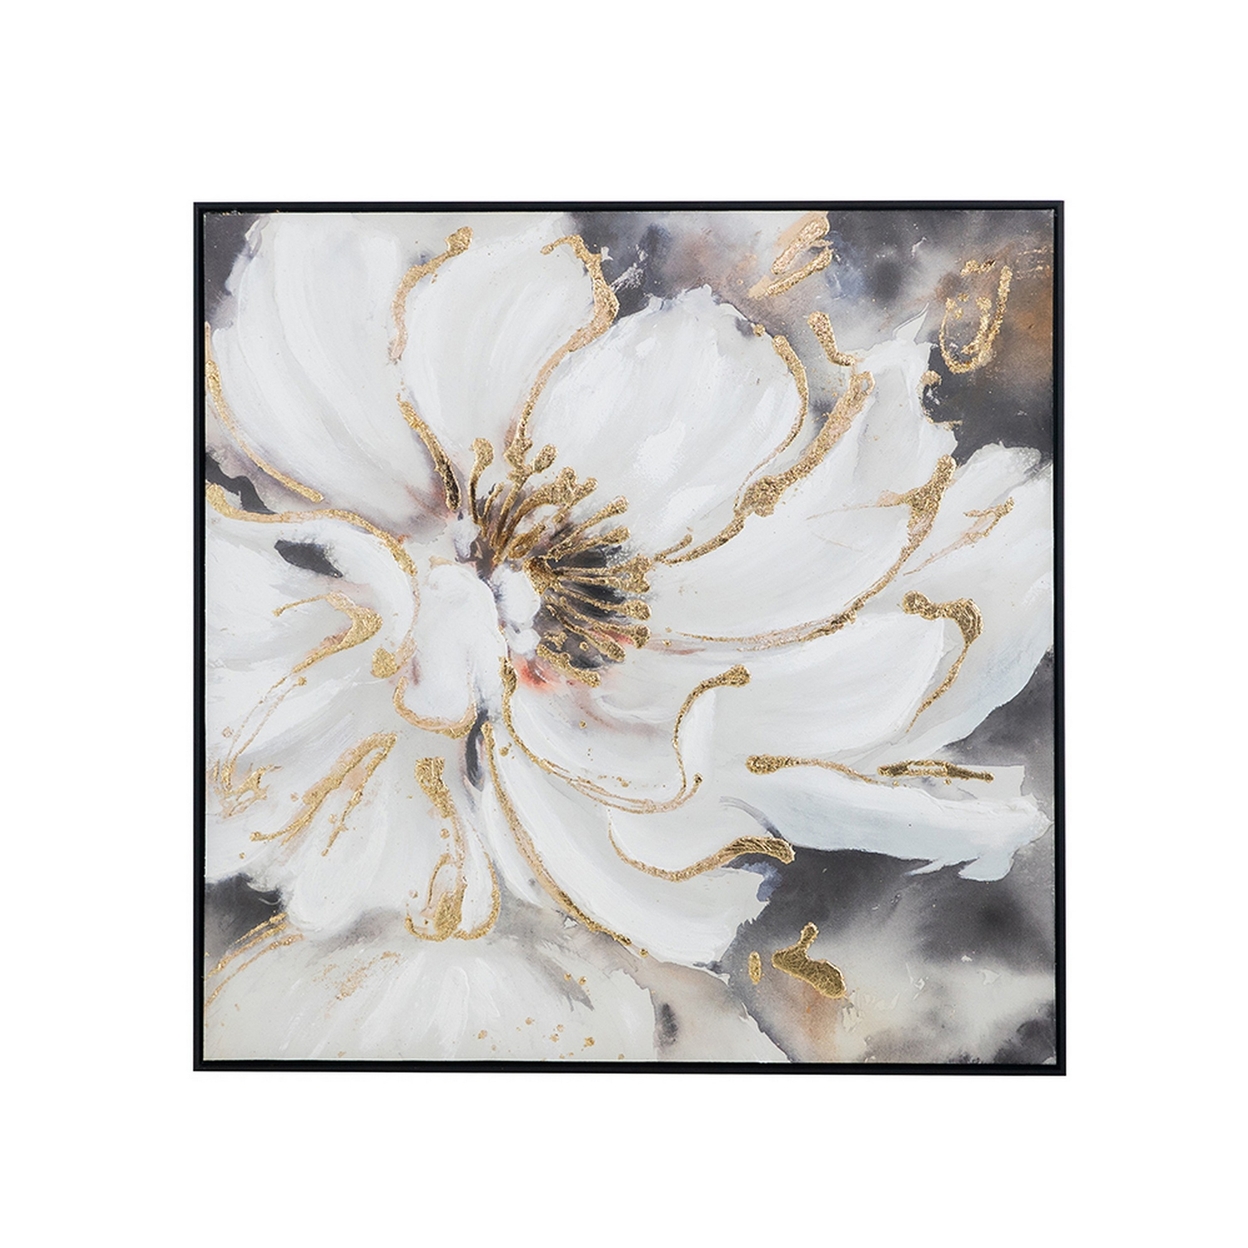 36 X 36 Inch Framed Wall Art, Floral Oil Painting On Canvas, White Gold- Saltoro Sherpi